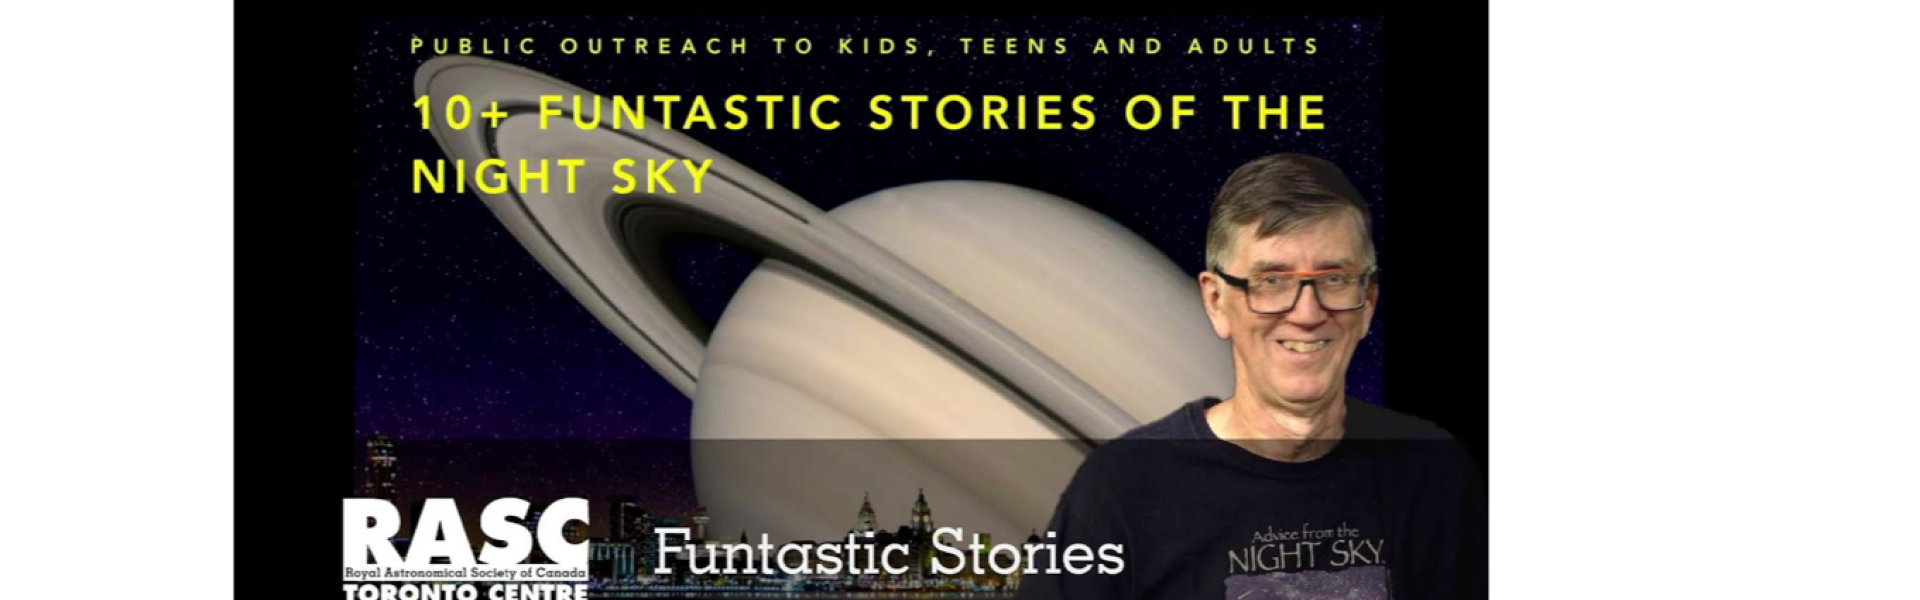 Funtastic Stories of the Night Sky